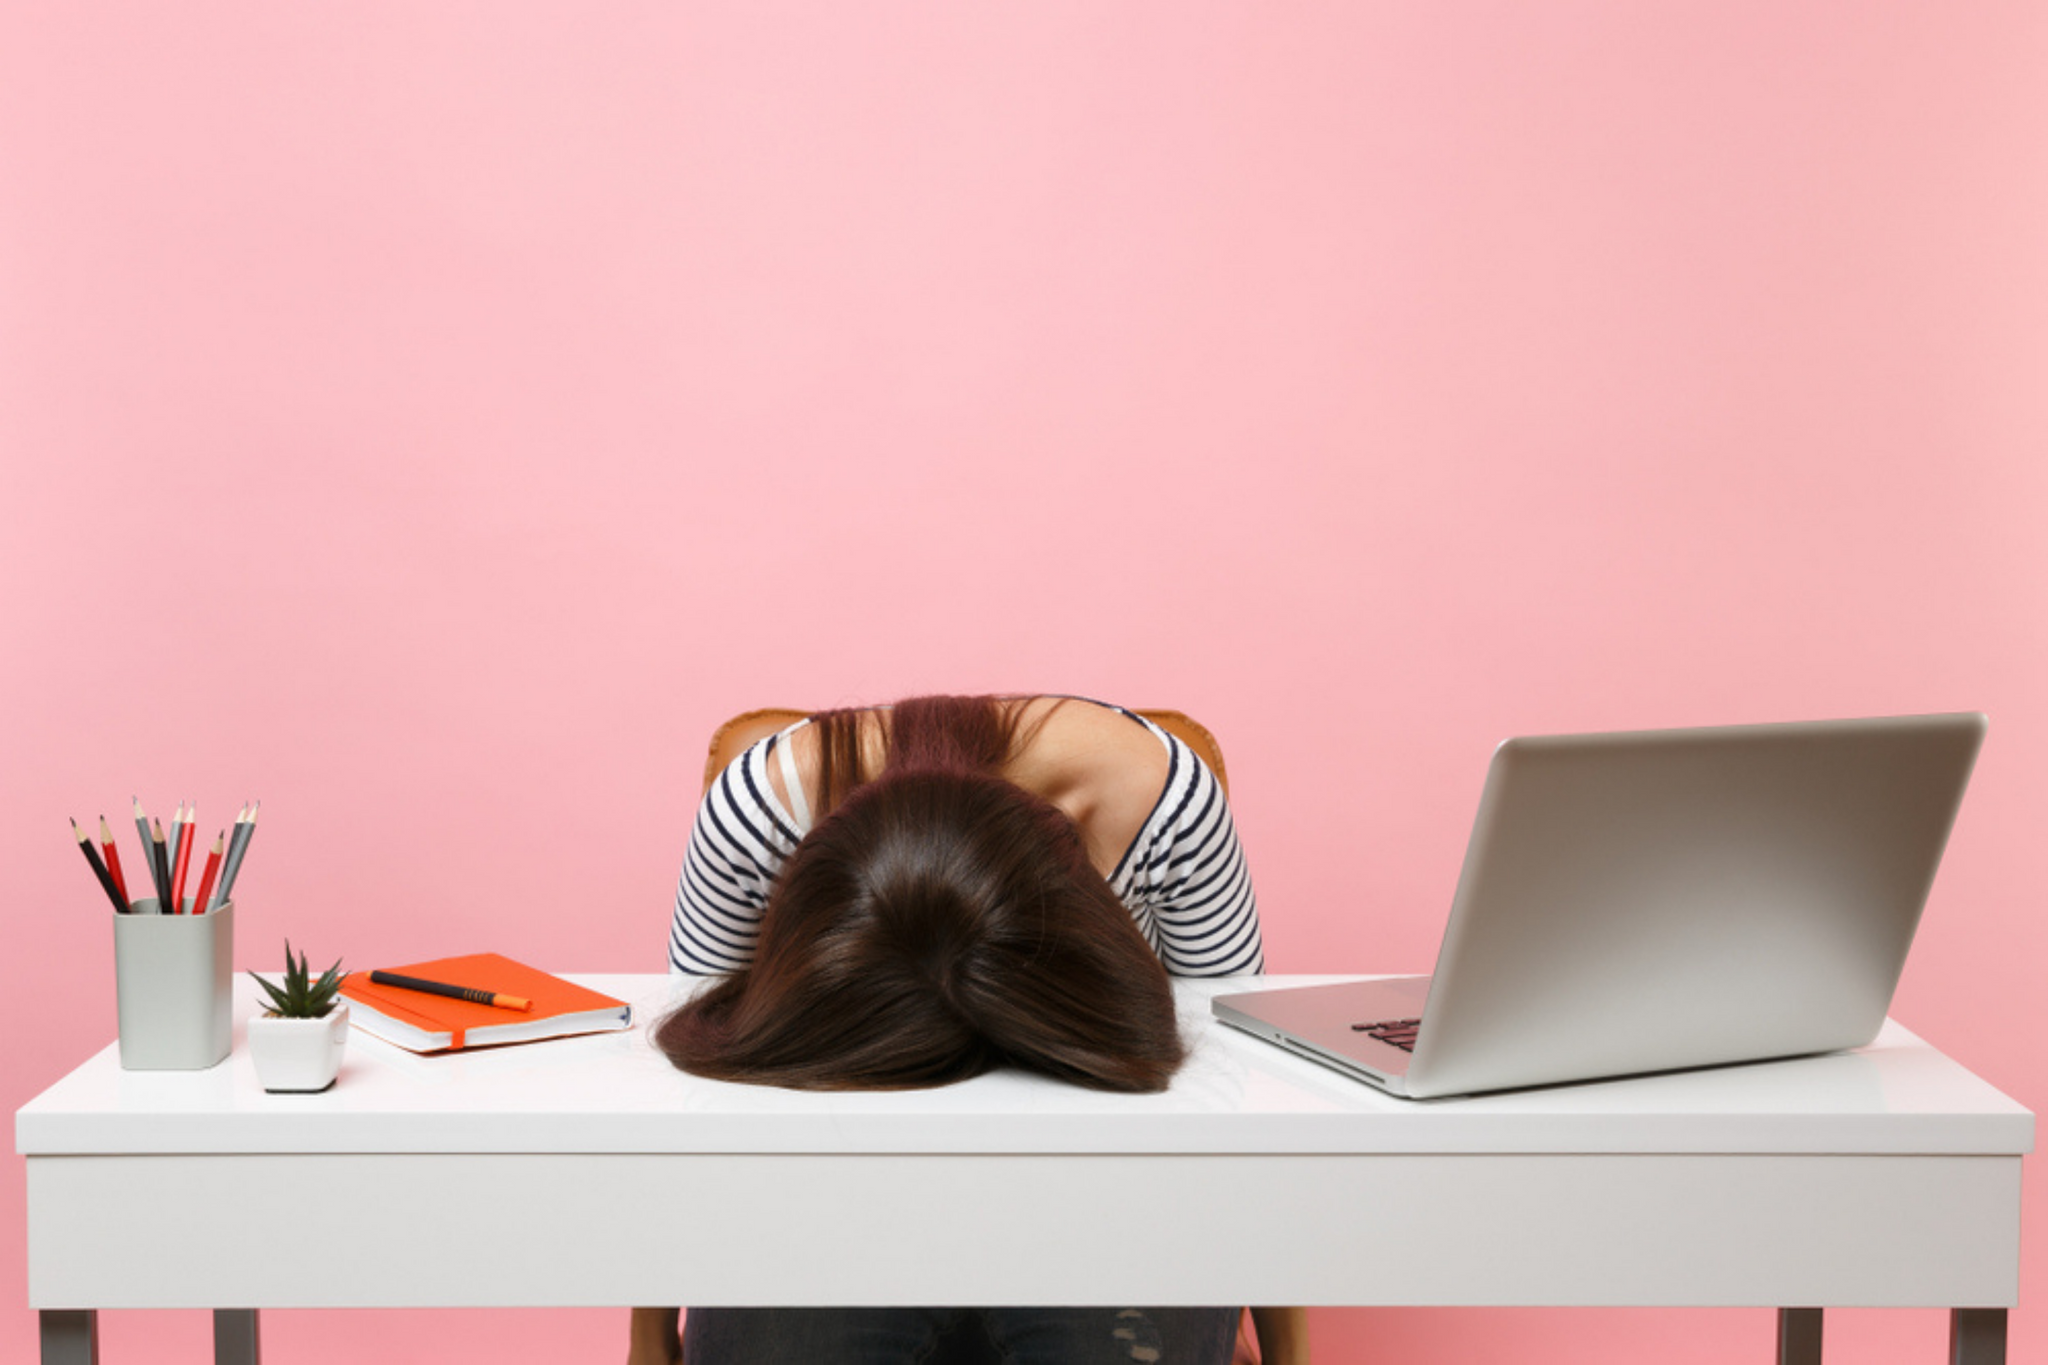 The 7 Signs of Exhaustion